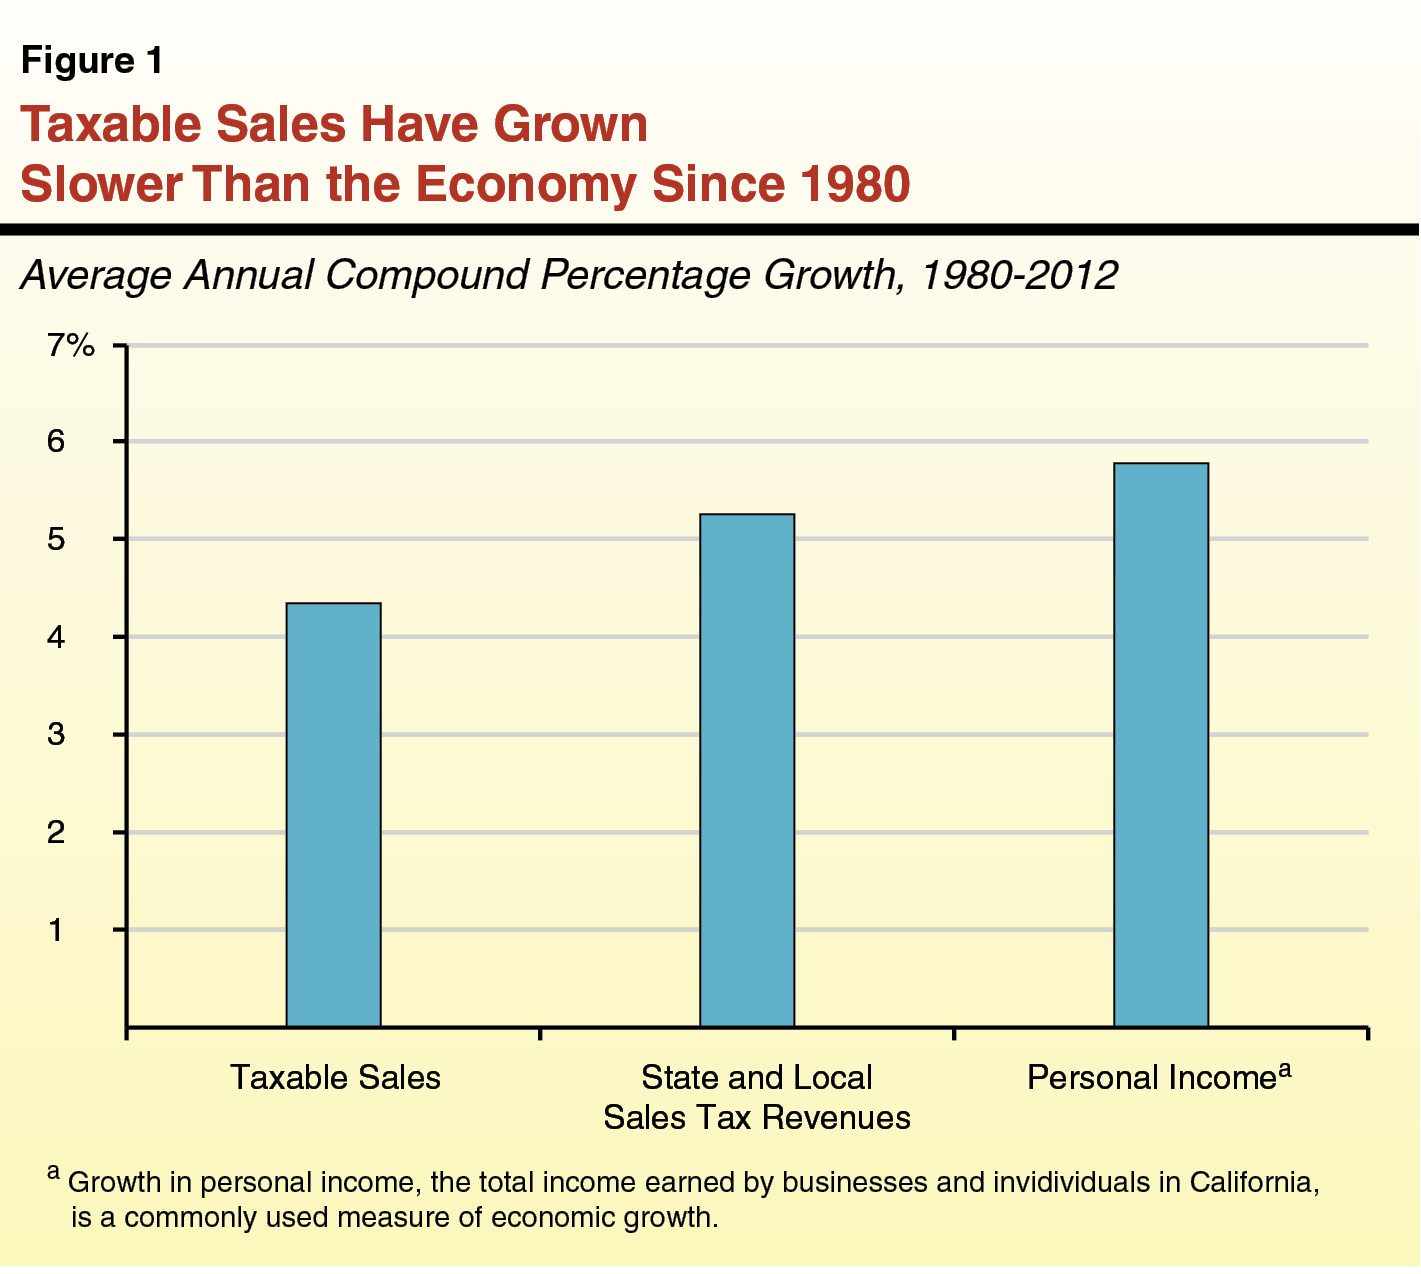 Taxable Sales Have Grown Slower than the Economy Since 1980